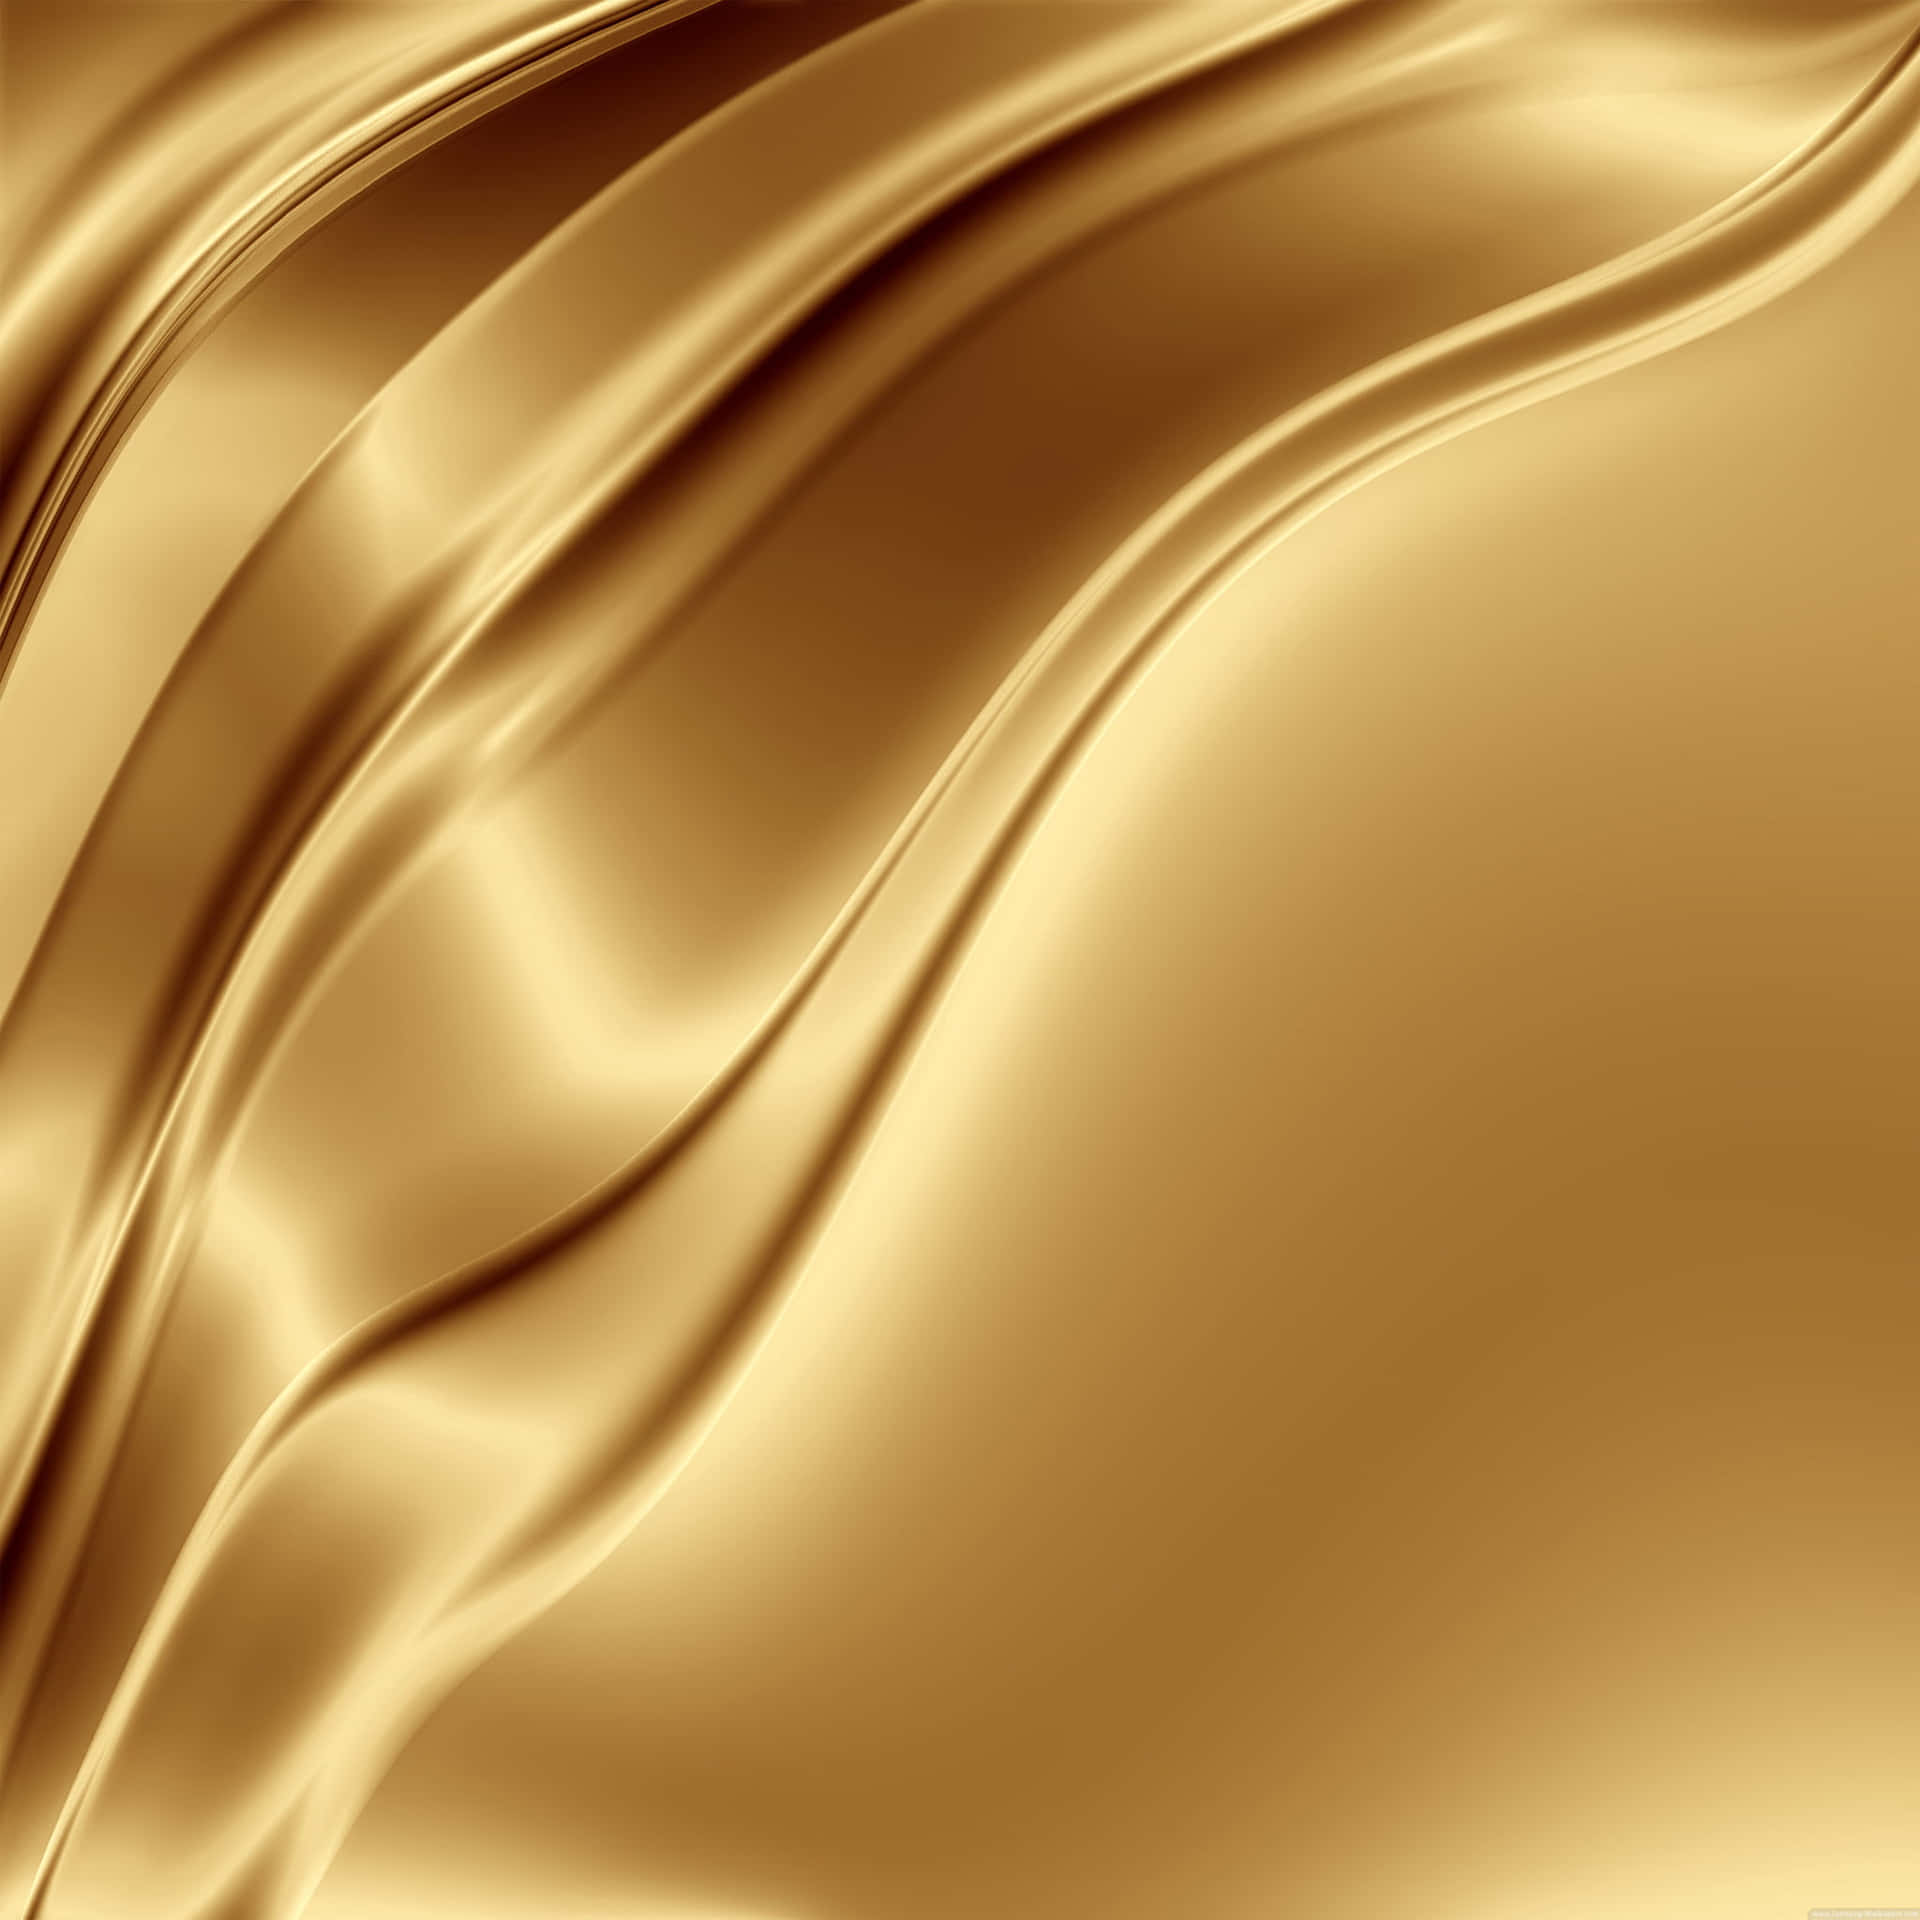 Golden Glimmer - Shimmering Abstract Background